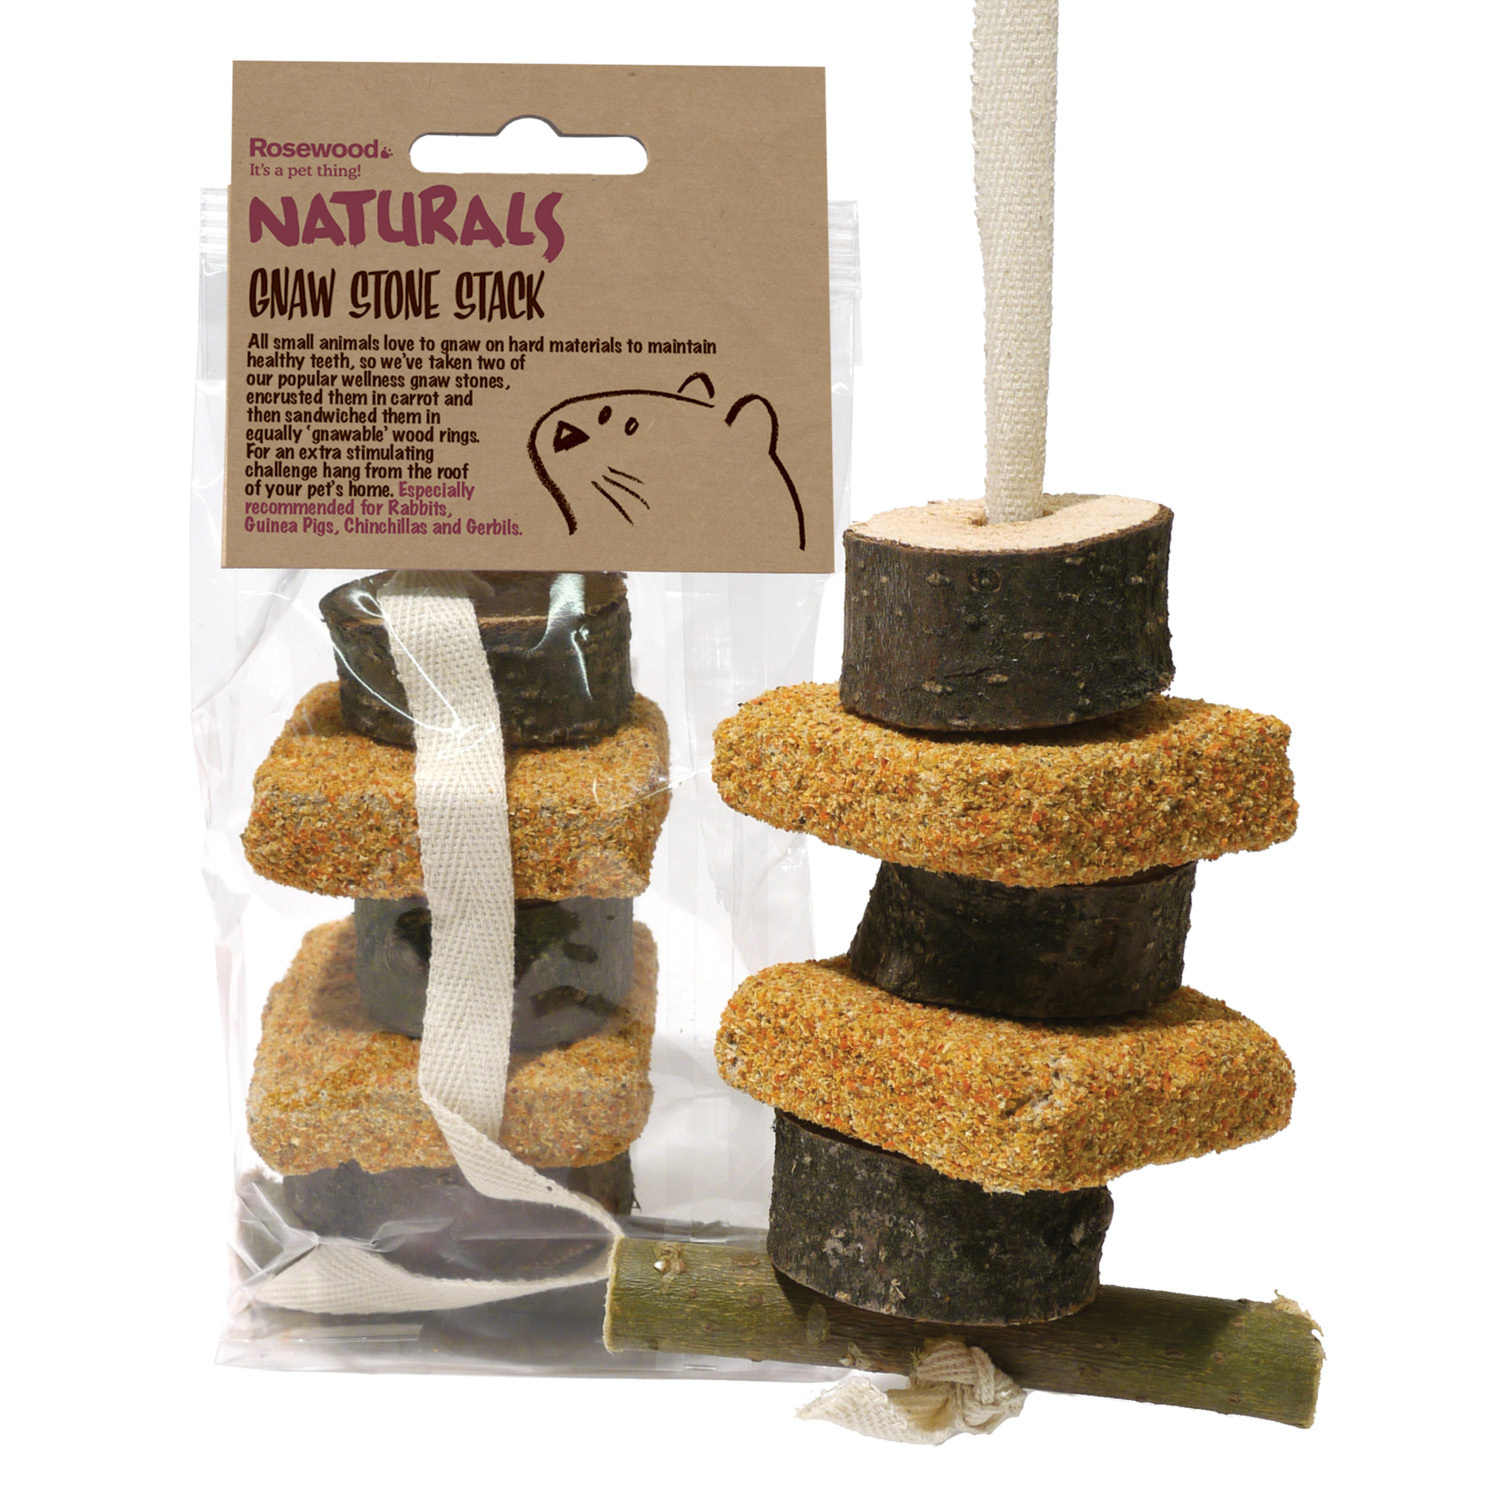 Rosewood Naturals Small Animal Gnaw Stone Stack Image